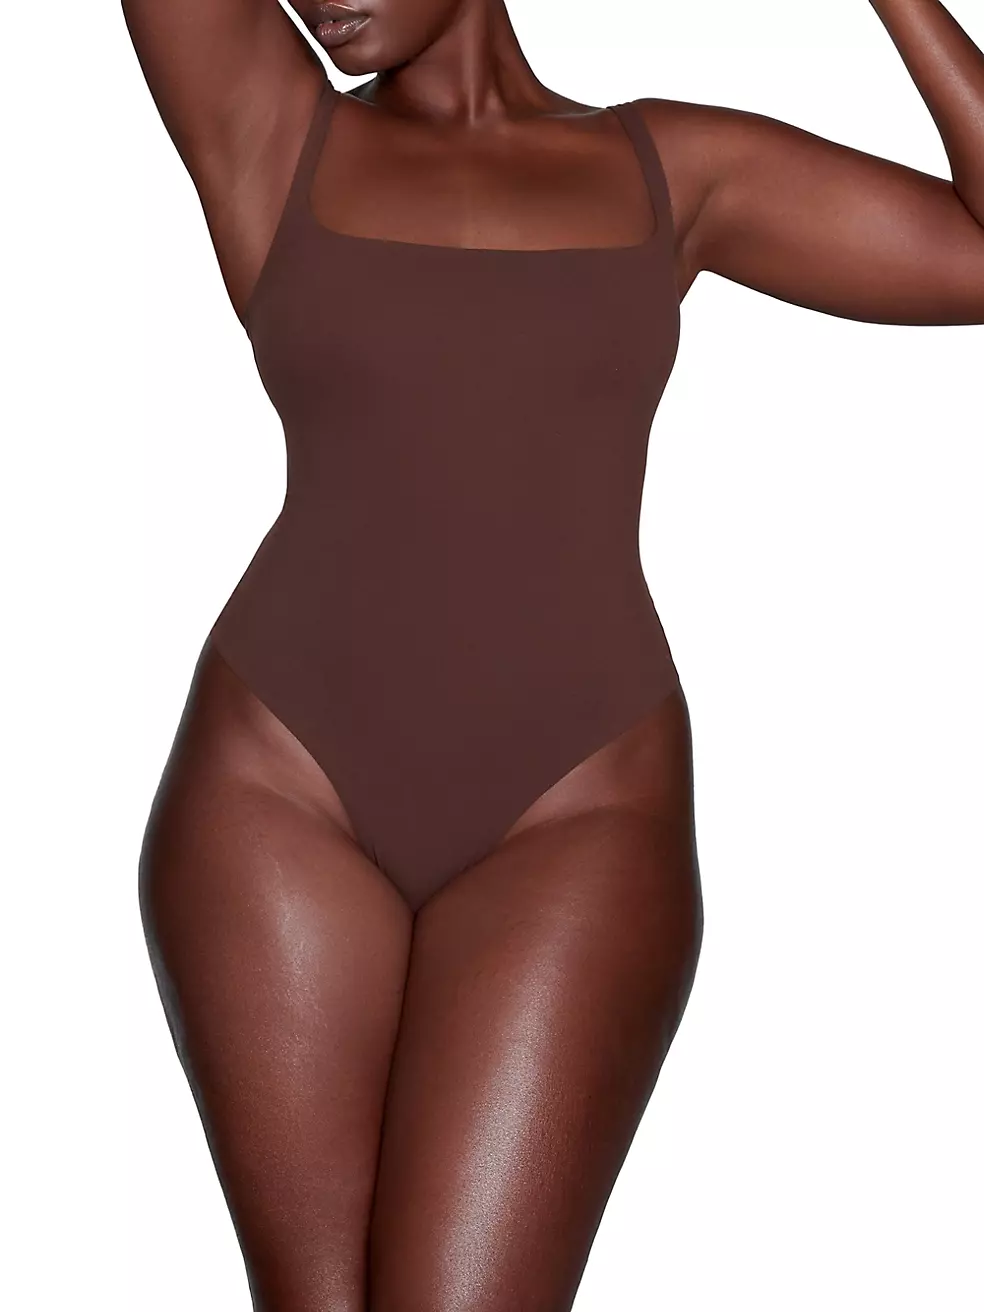 SKIMS Fits Everybody Square Neck Bodysuit in Mica L Size L - $75 New With  Tags - From Matilda